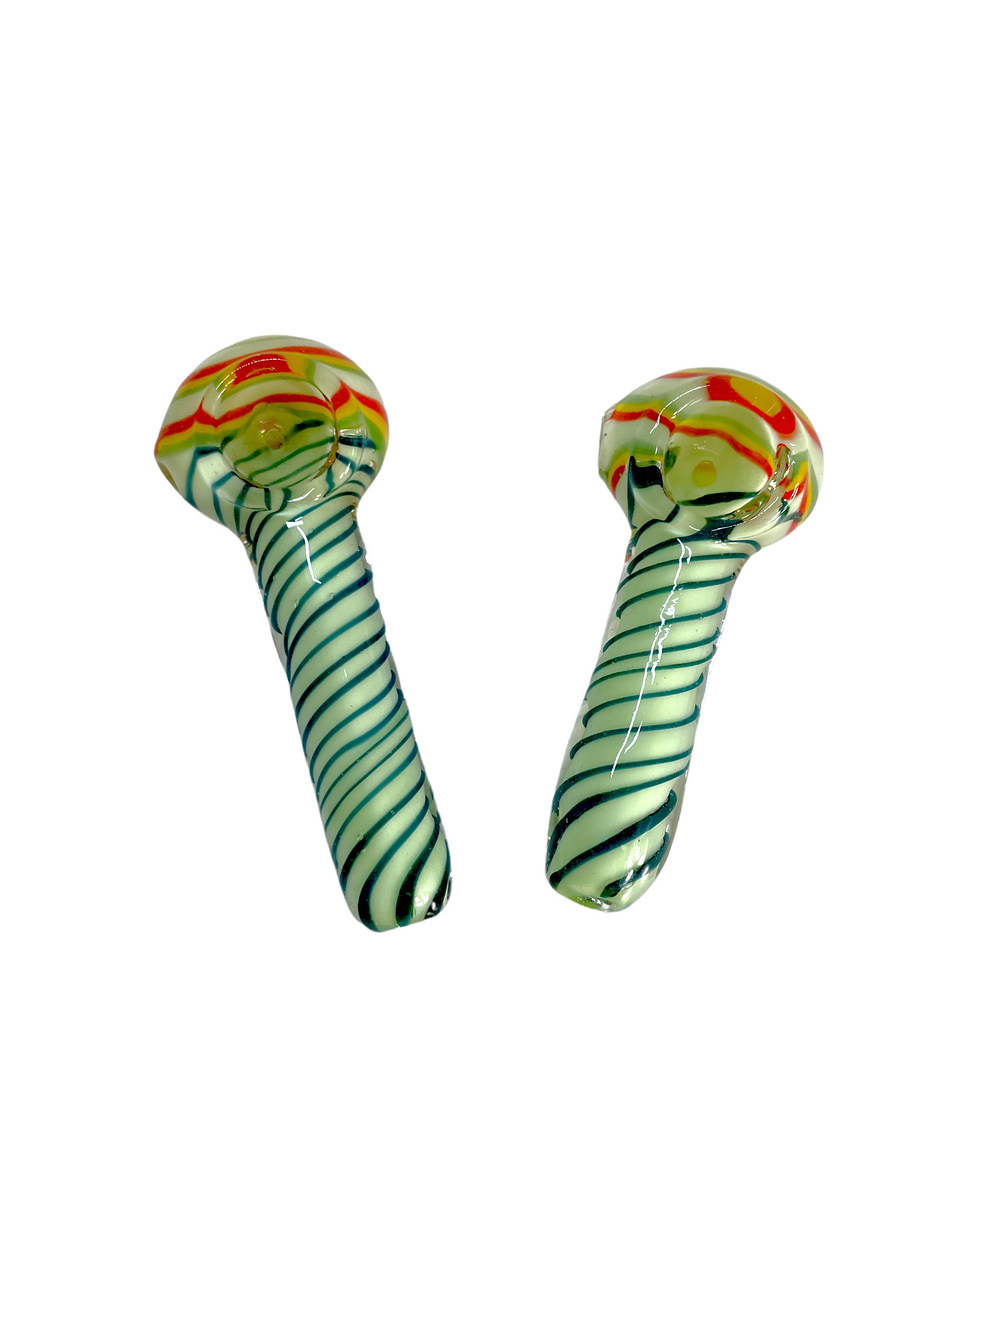 3.5" Slime Spiral Glass Hand Pipe